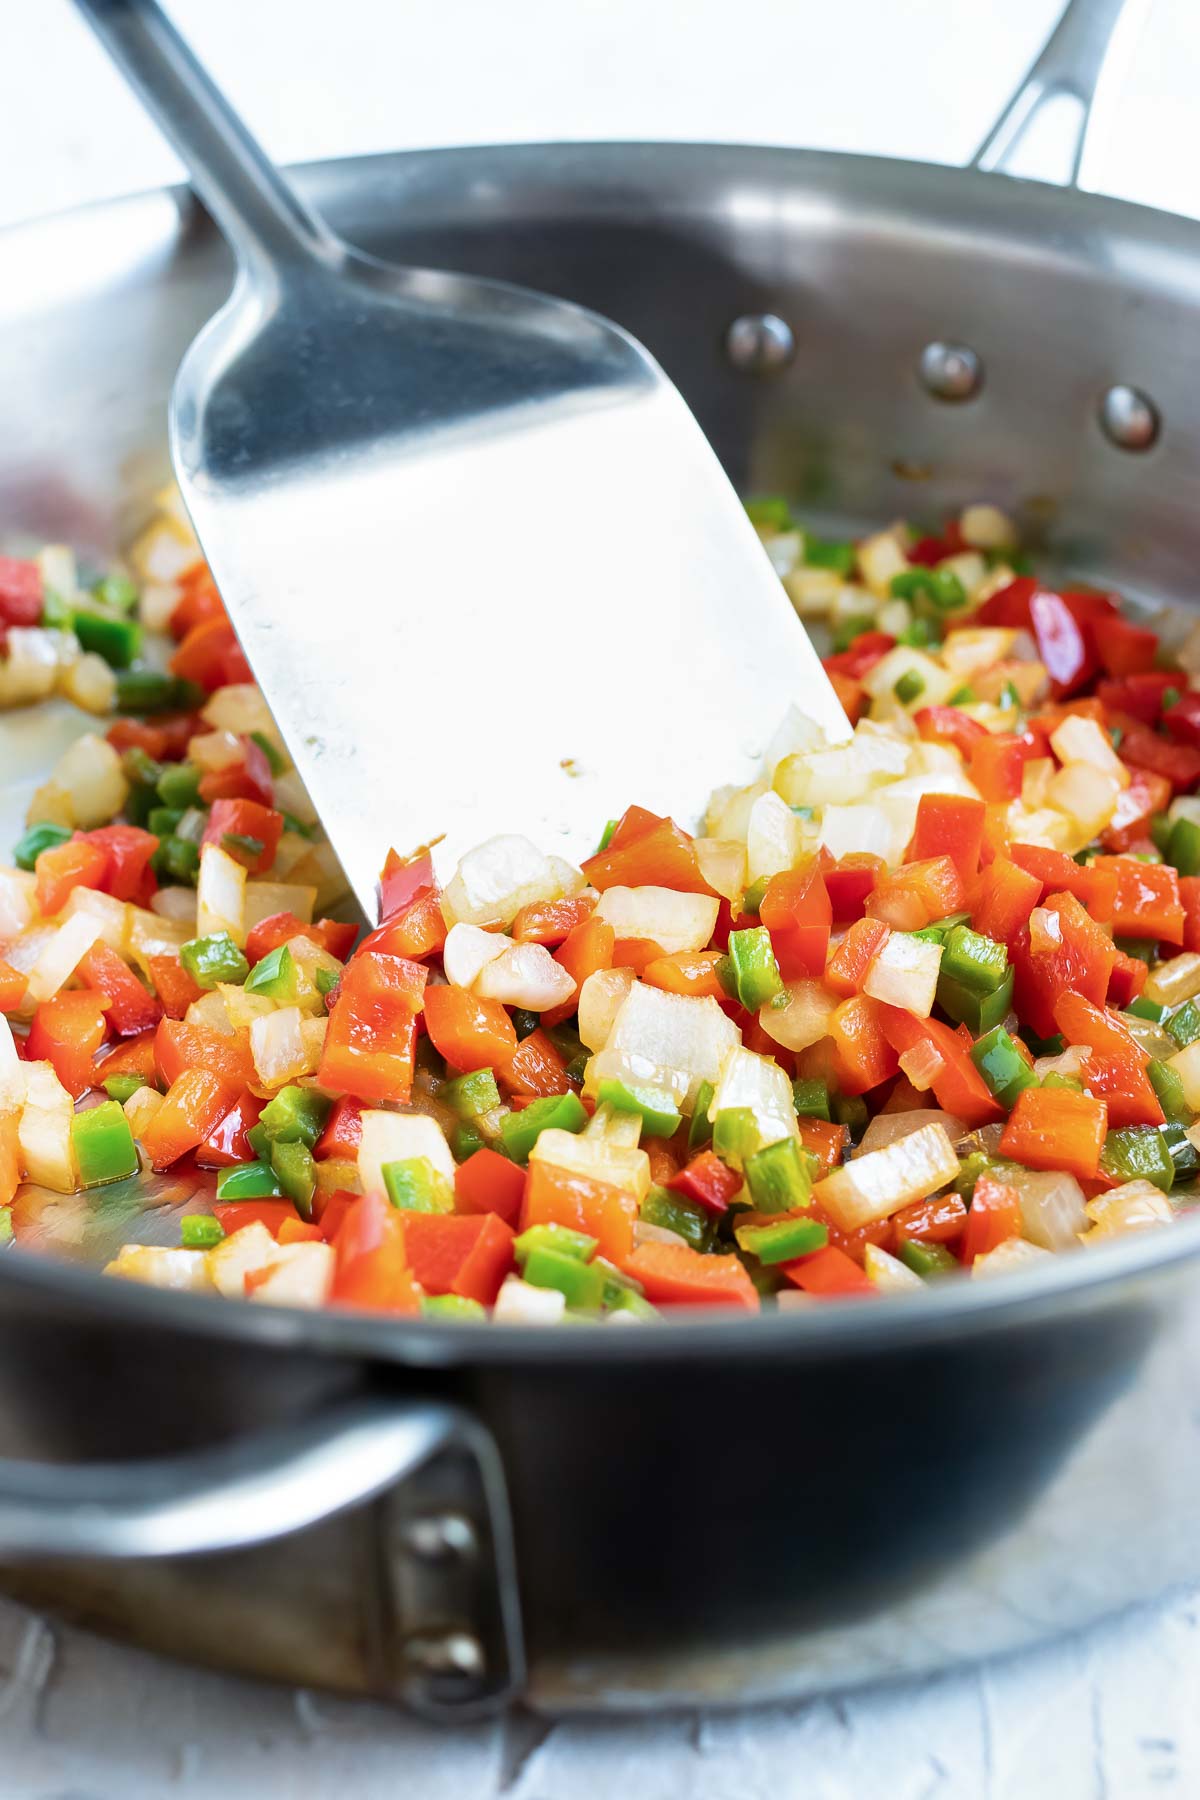 A stainless steel skillet full of jalapeno, onion, and red bell pepper.